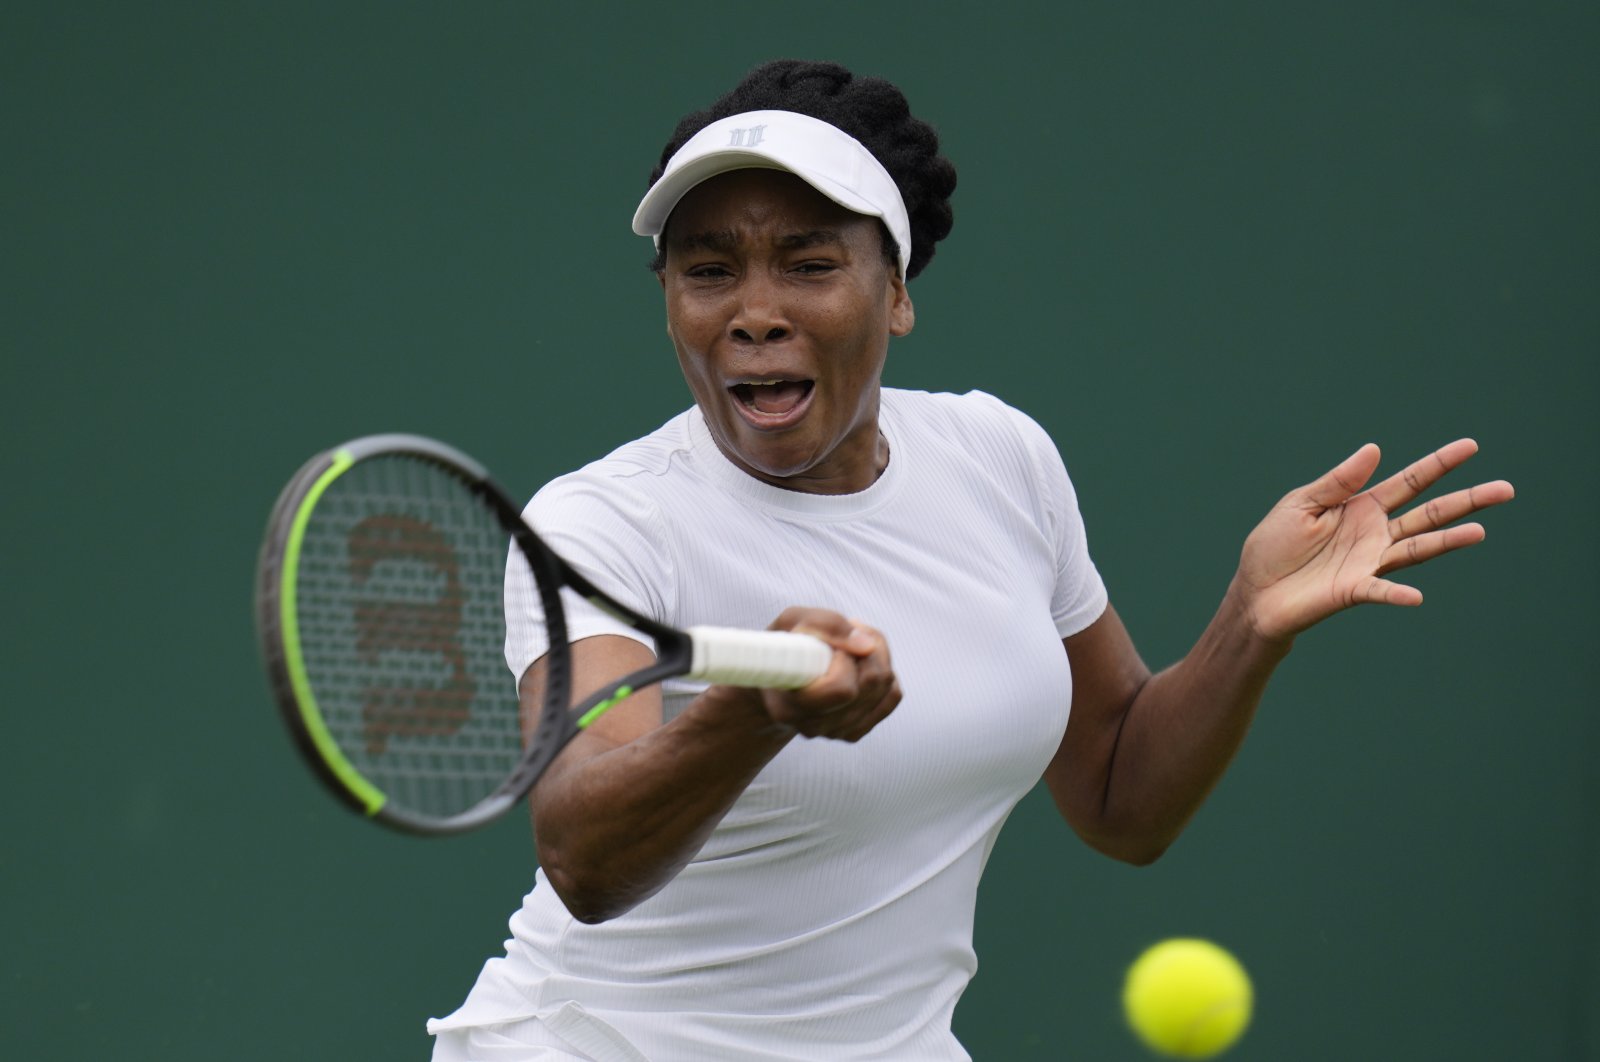 Venus Williams of the U.S. plays a return to Romania's Mihaela Buzarnescu during the women's singles first round match on day two of the Wimbledon Tennis Championships in London, June 29, 2021. (AP Photo)